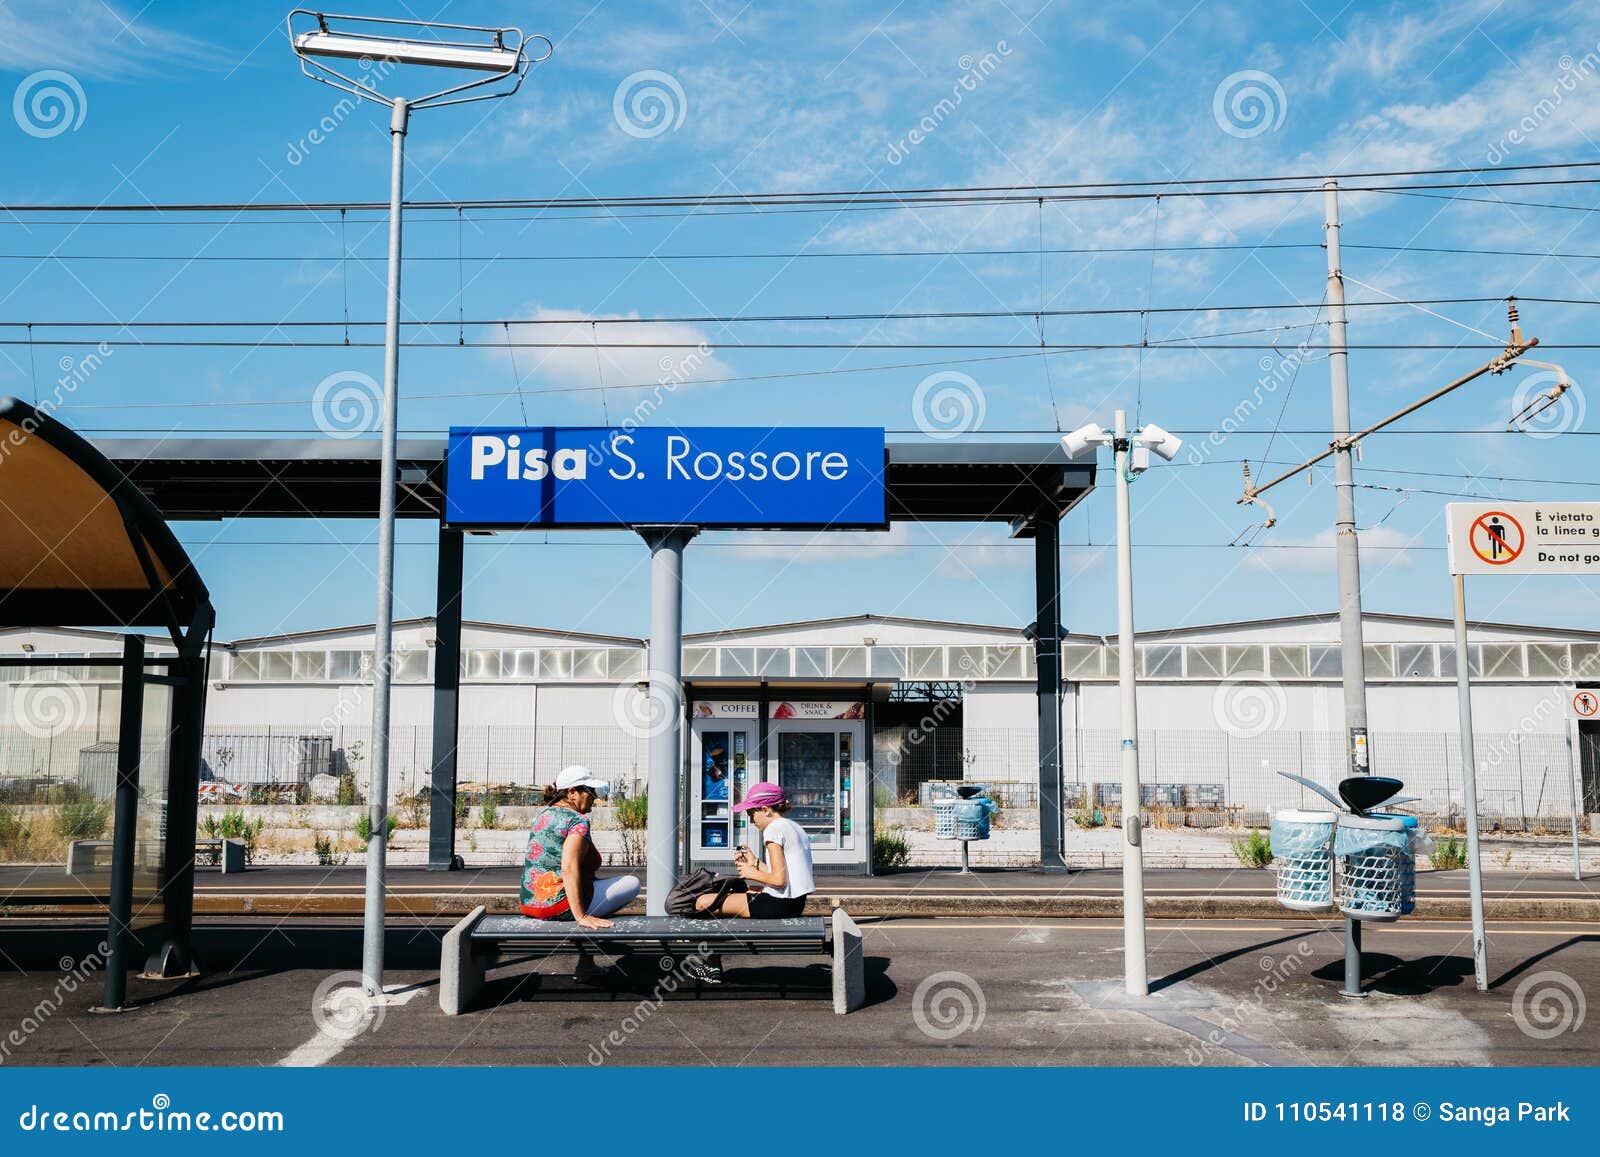 Pisa S.Rossore Train Station in Italy Editorial Stock Photo - Image of ...